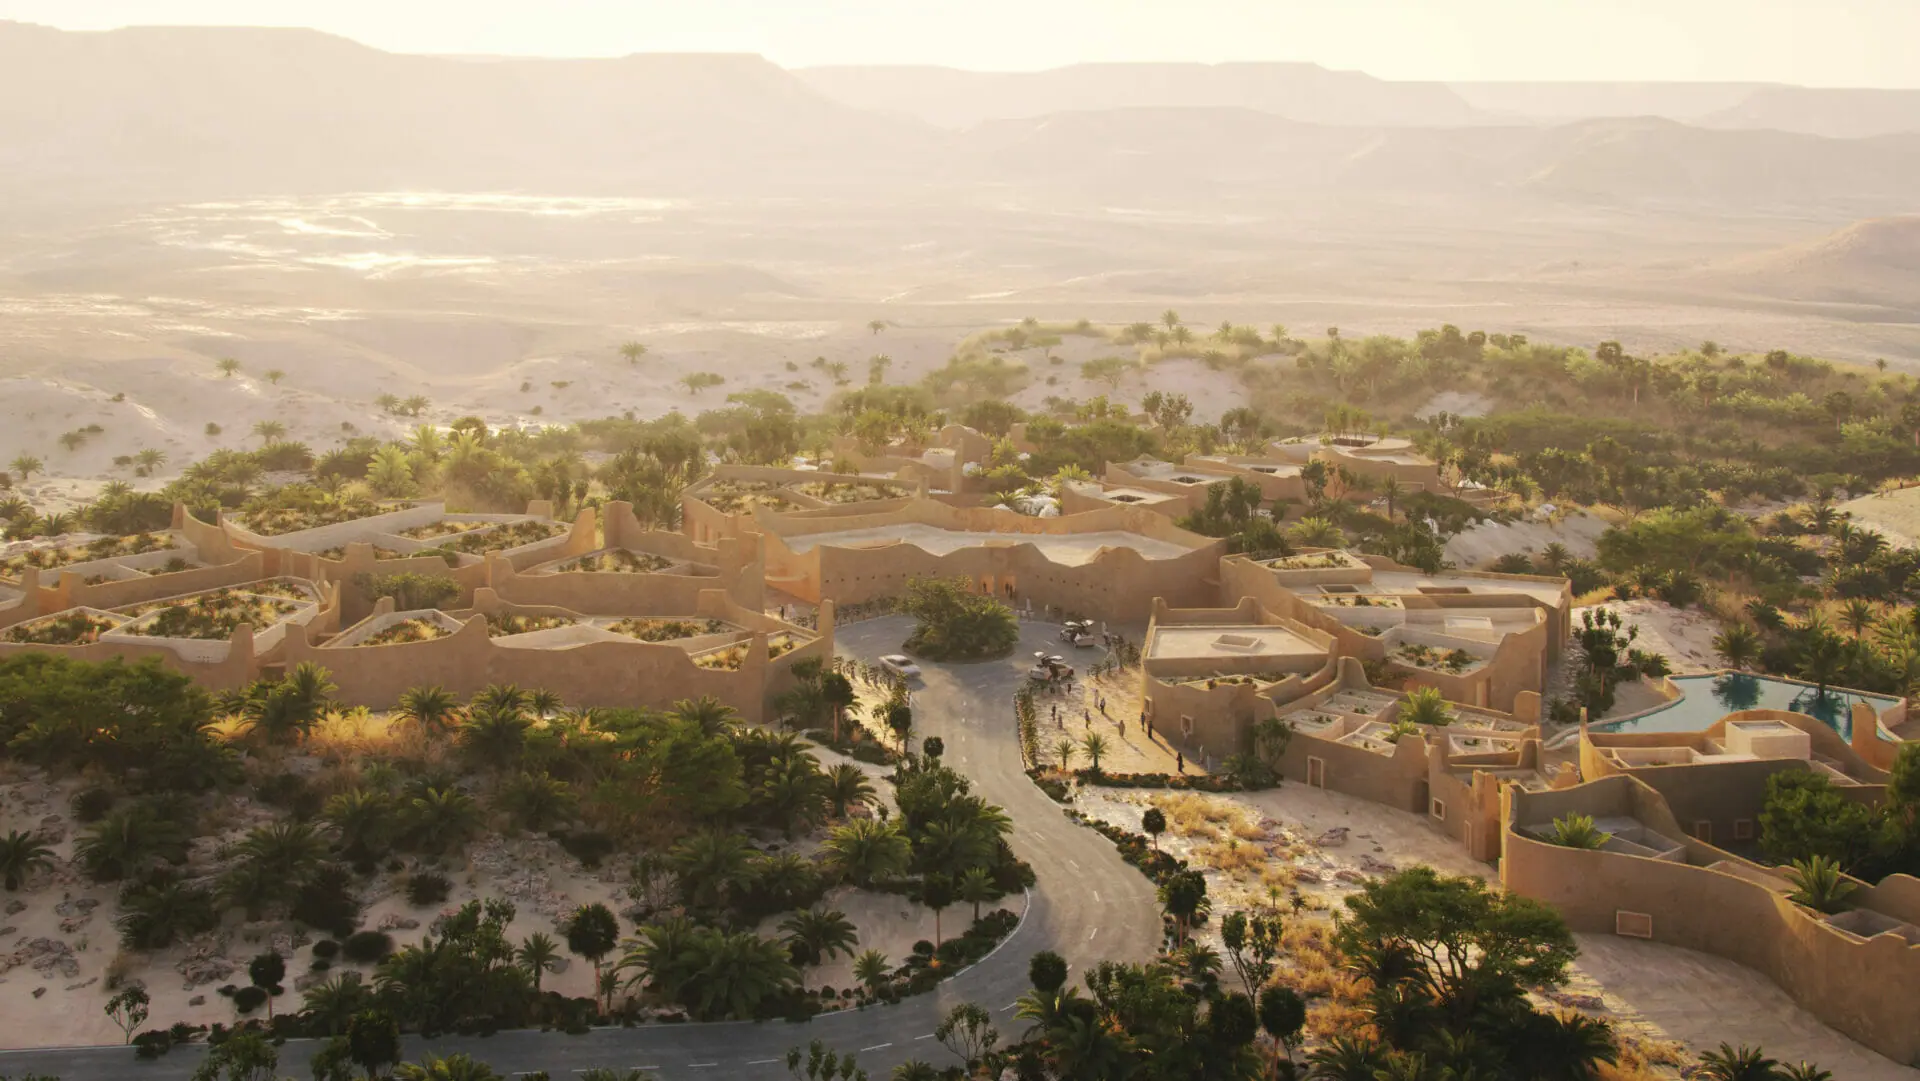 GHM Joins the Stellar Cast of Iconic Brands in Saudi Arabias Diriyah with Signing of The Chedi Wadi Safar